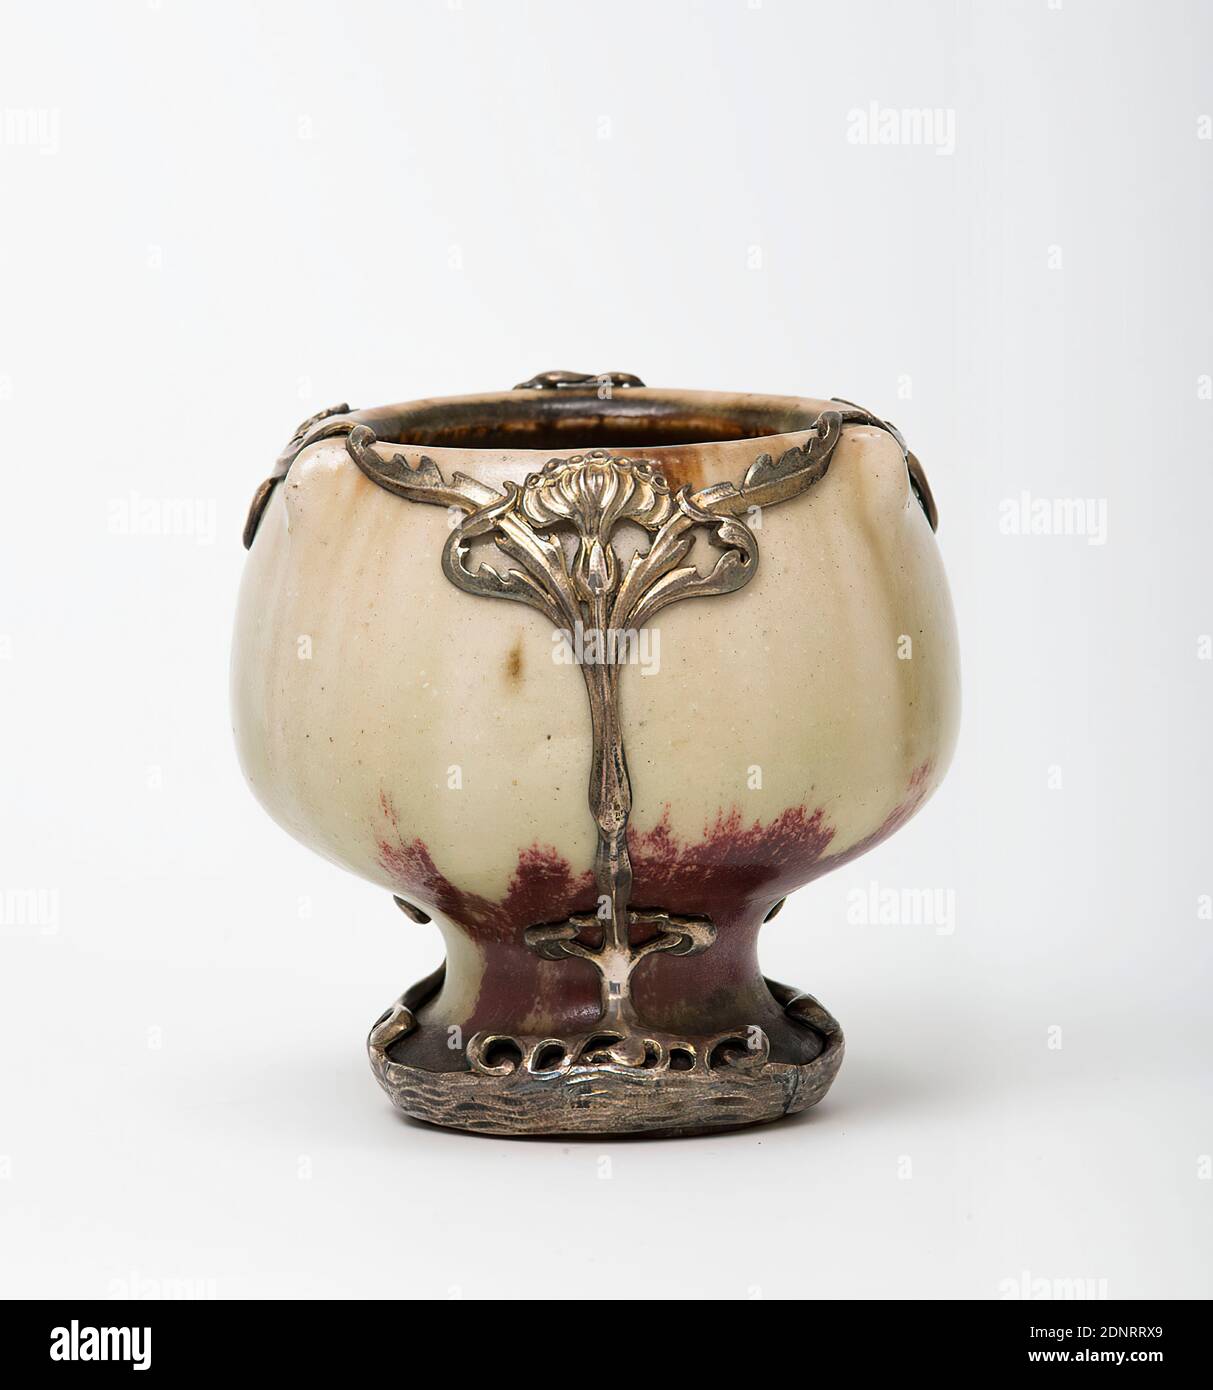 Pierre Adrien Dalpayrat, Marcel Bing, Cup with silver mount, Acquired by S. Bing, L'Art Nouveau, Paris, at the Paris World Exhibition 1900, stoneware, glazed, Total: Height: 9,90 cm; Diameter: 9,50 cm, Stamp: Underside: under the glaze on the bottom Workshop stamp: drops with flames, beside it two green painted crosses, ceramics, drinking and barware, ornamental objects, dinner and serving dishes, plant ornaments, art nouveau Stock Photo